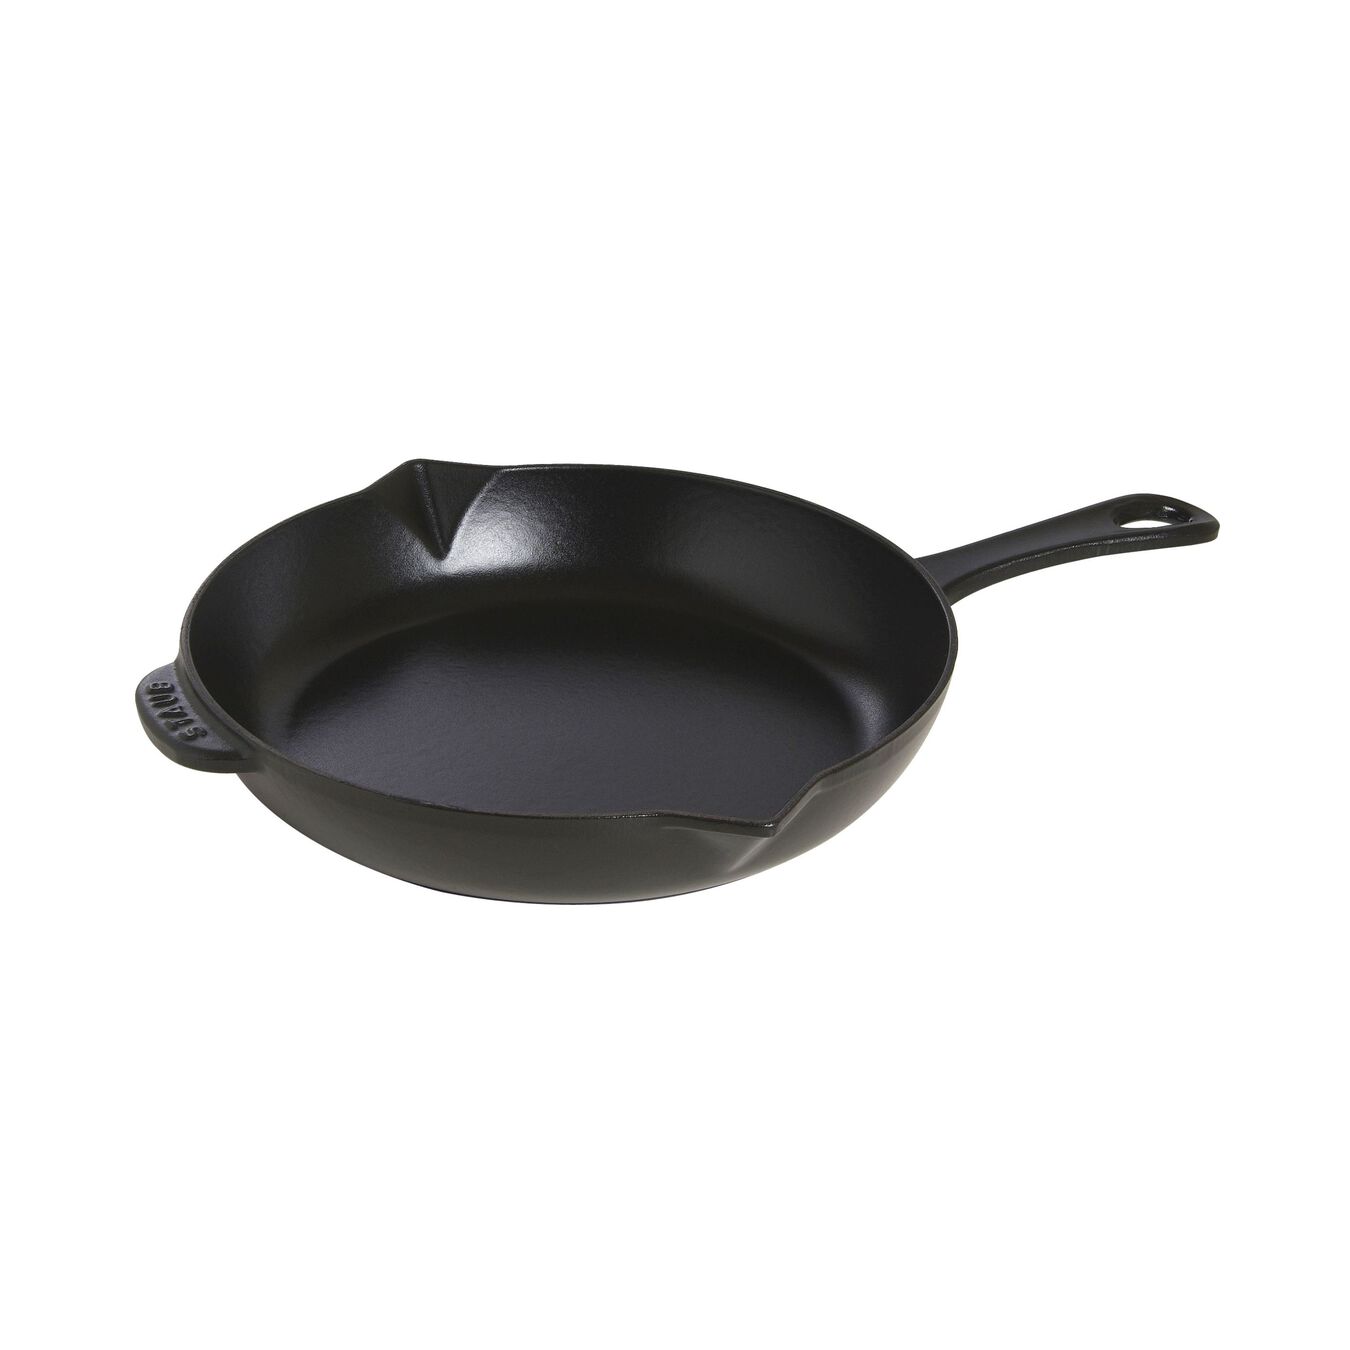 26 cm / 10 inch cast iron Frying pan with pouring spout, black,,large 1